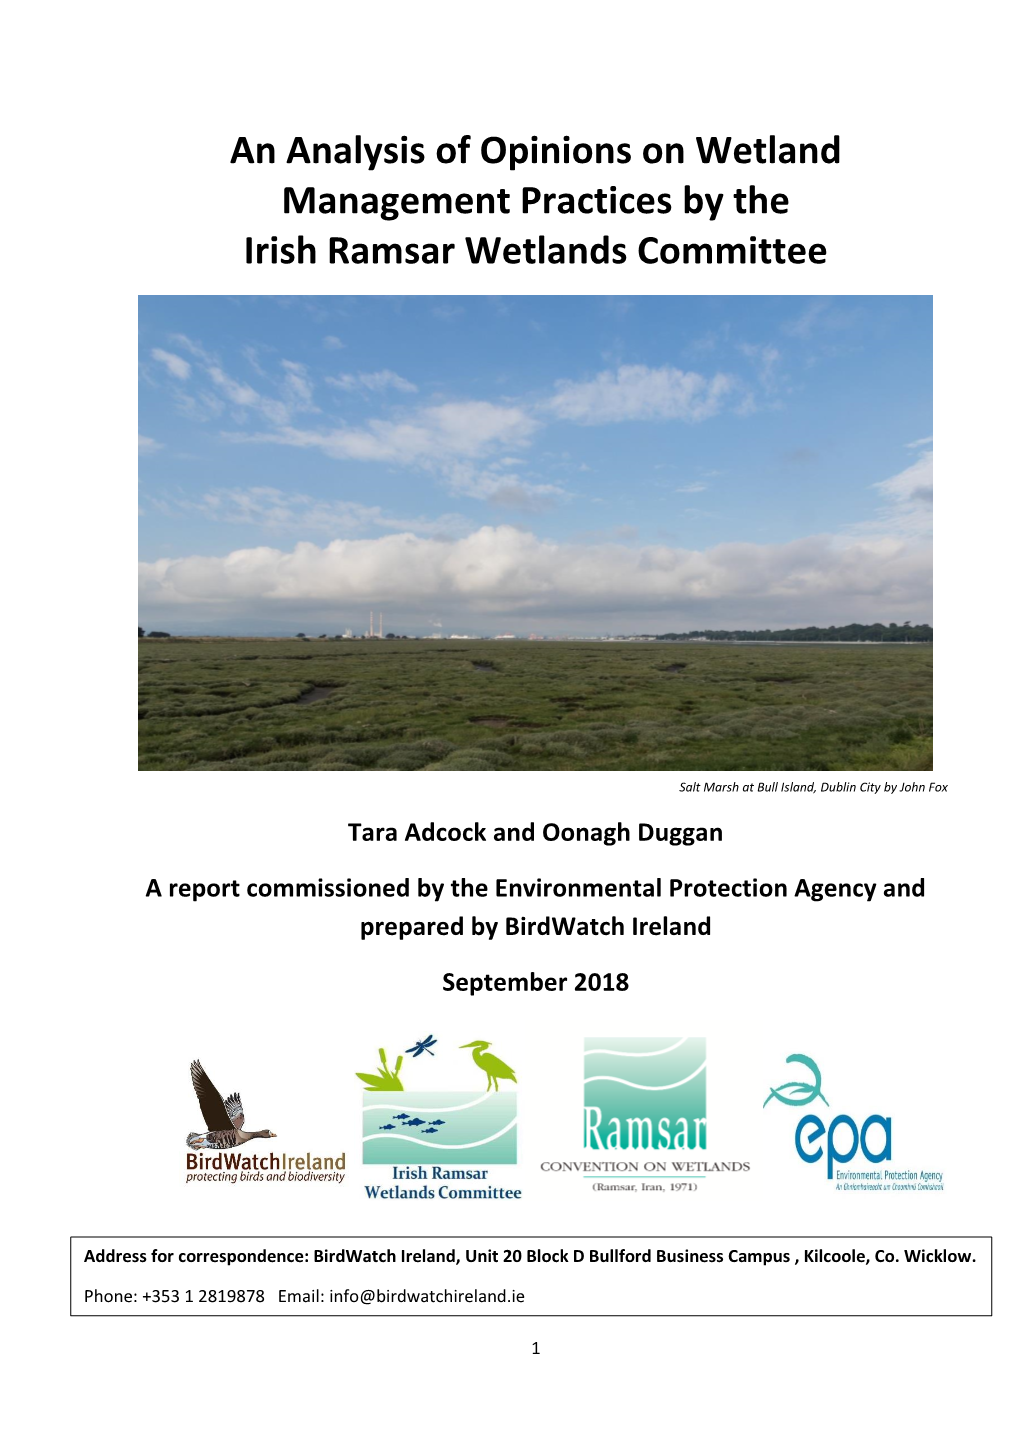 An Analysis of Opinions on Wetland Management Practices by the Irish Ramsar Wetlands Committee